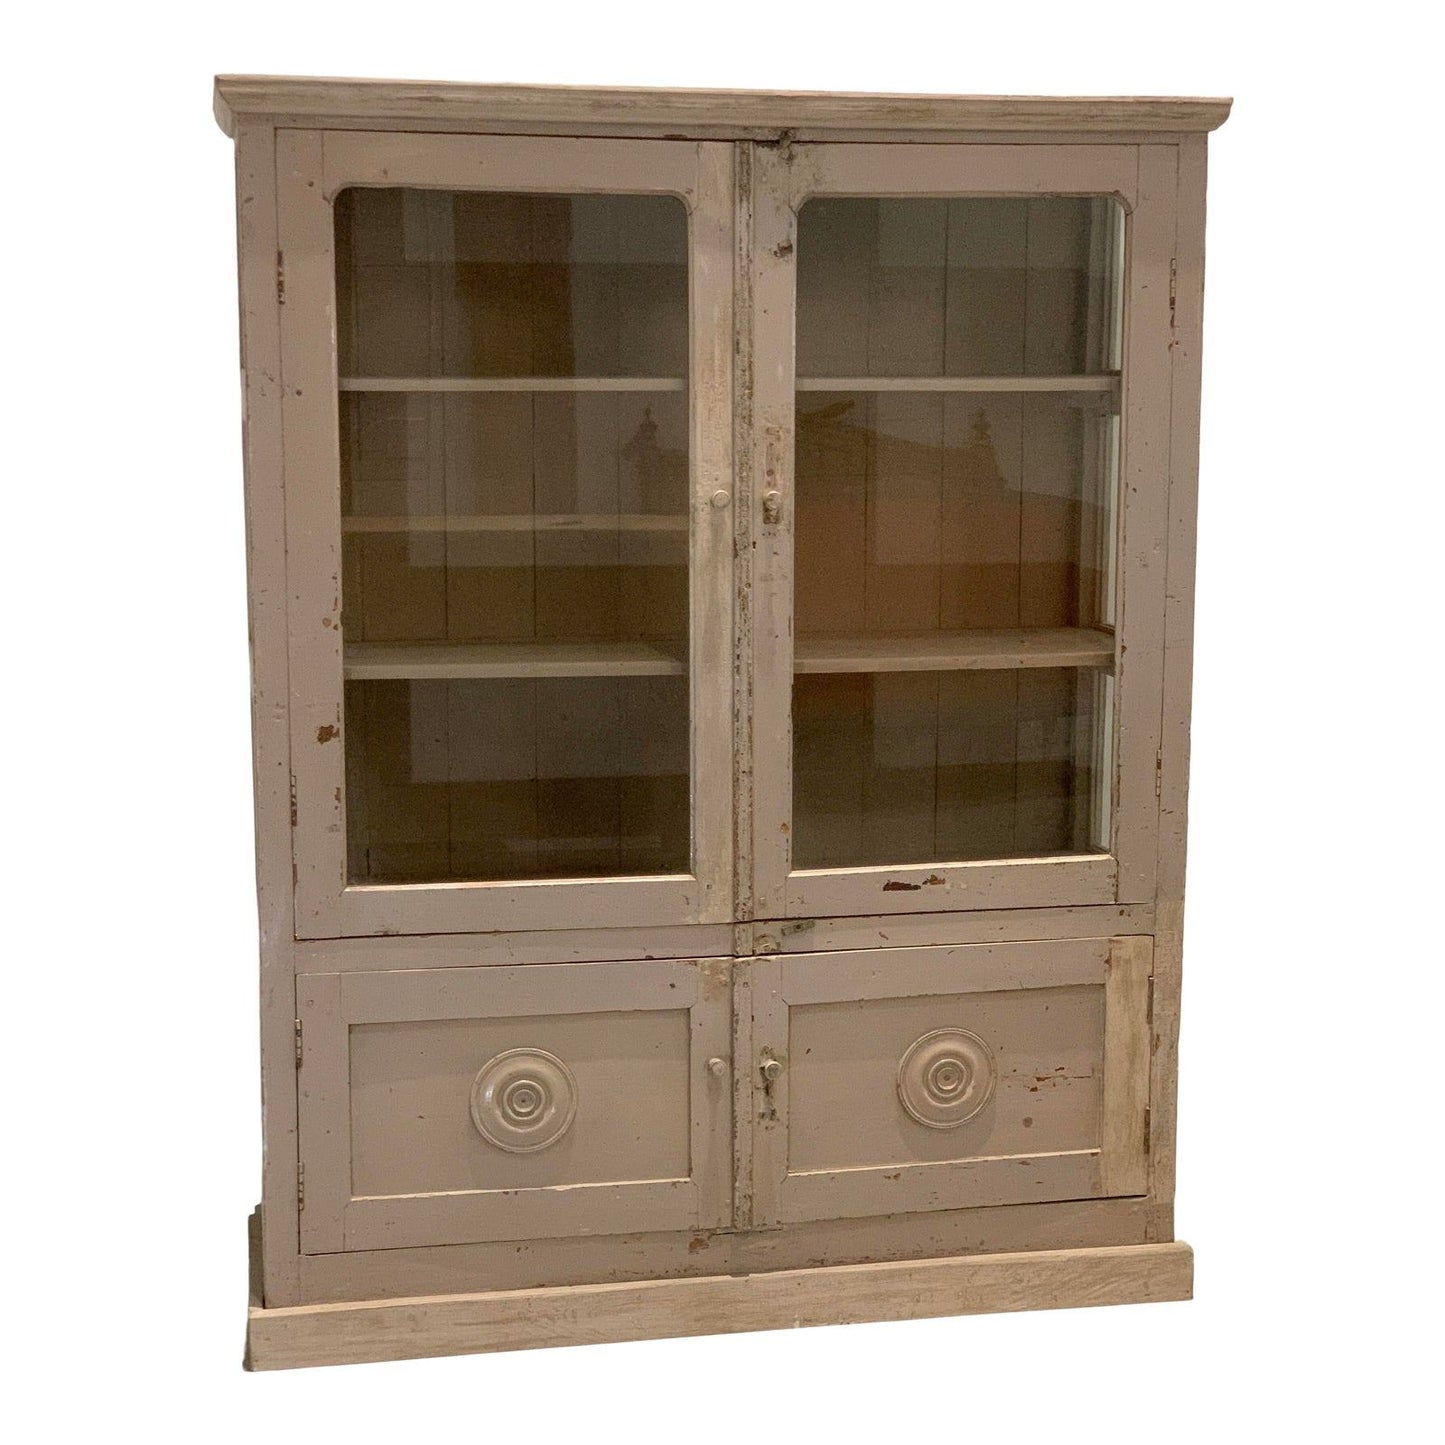 Vintage French Beige Display Case With 2 Glass Doors - The White Barn Antiques